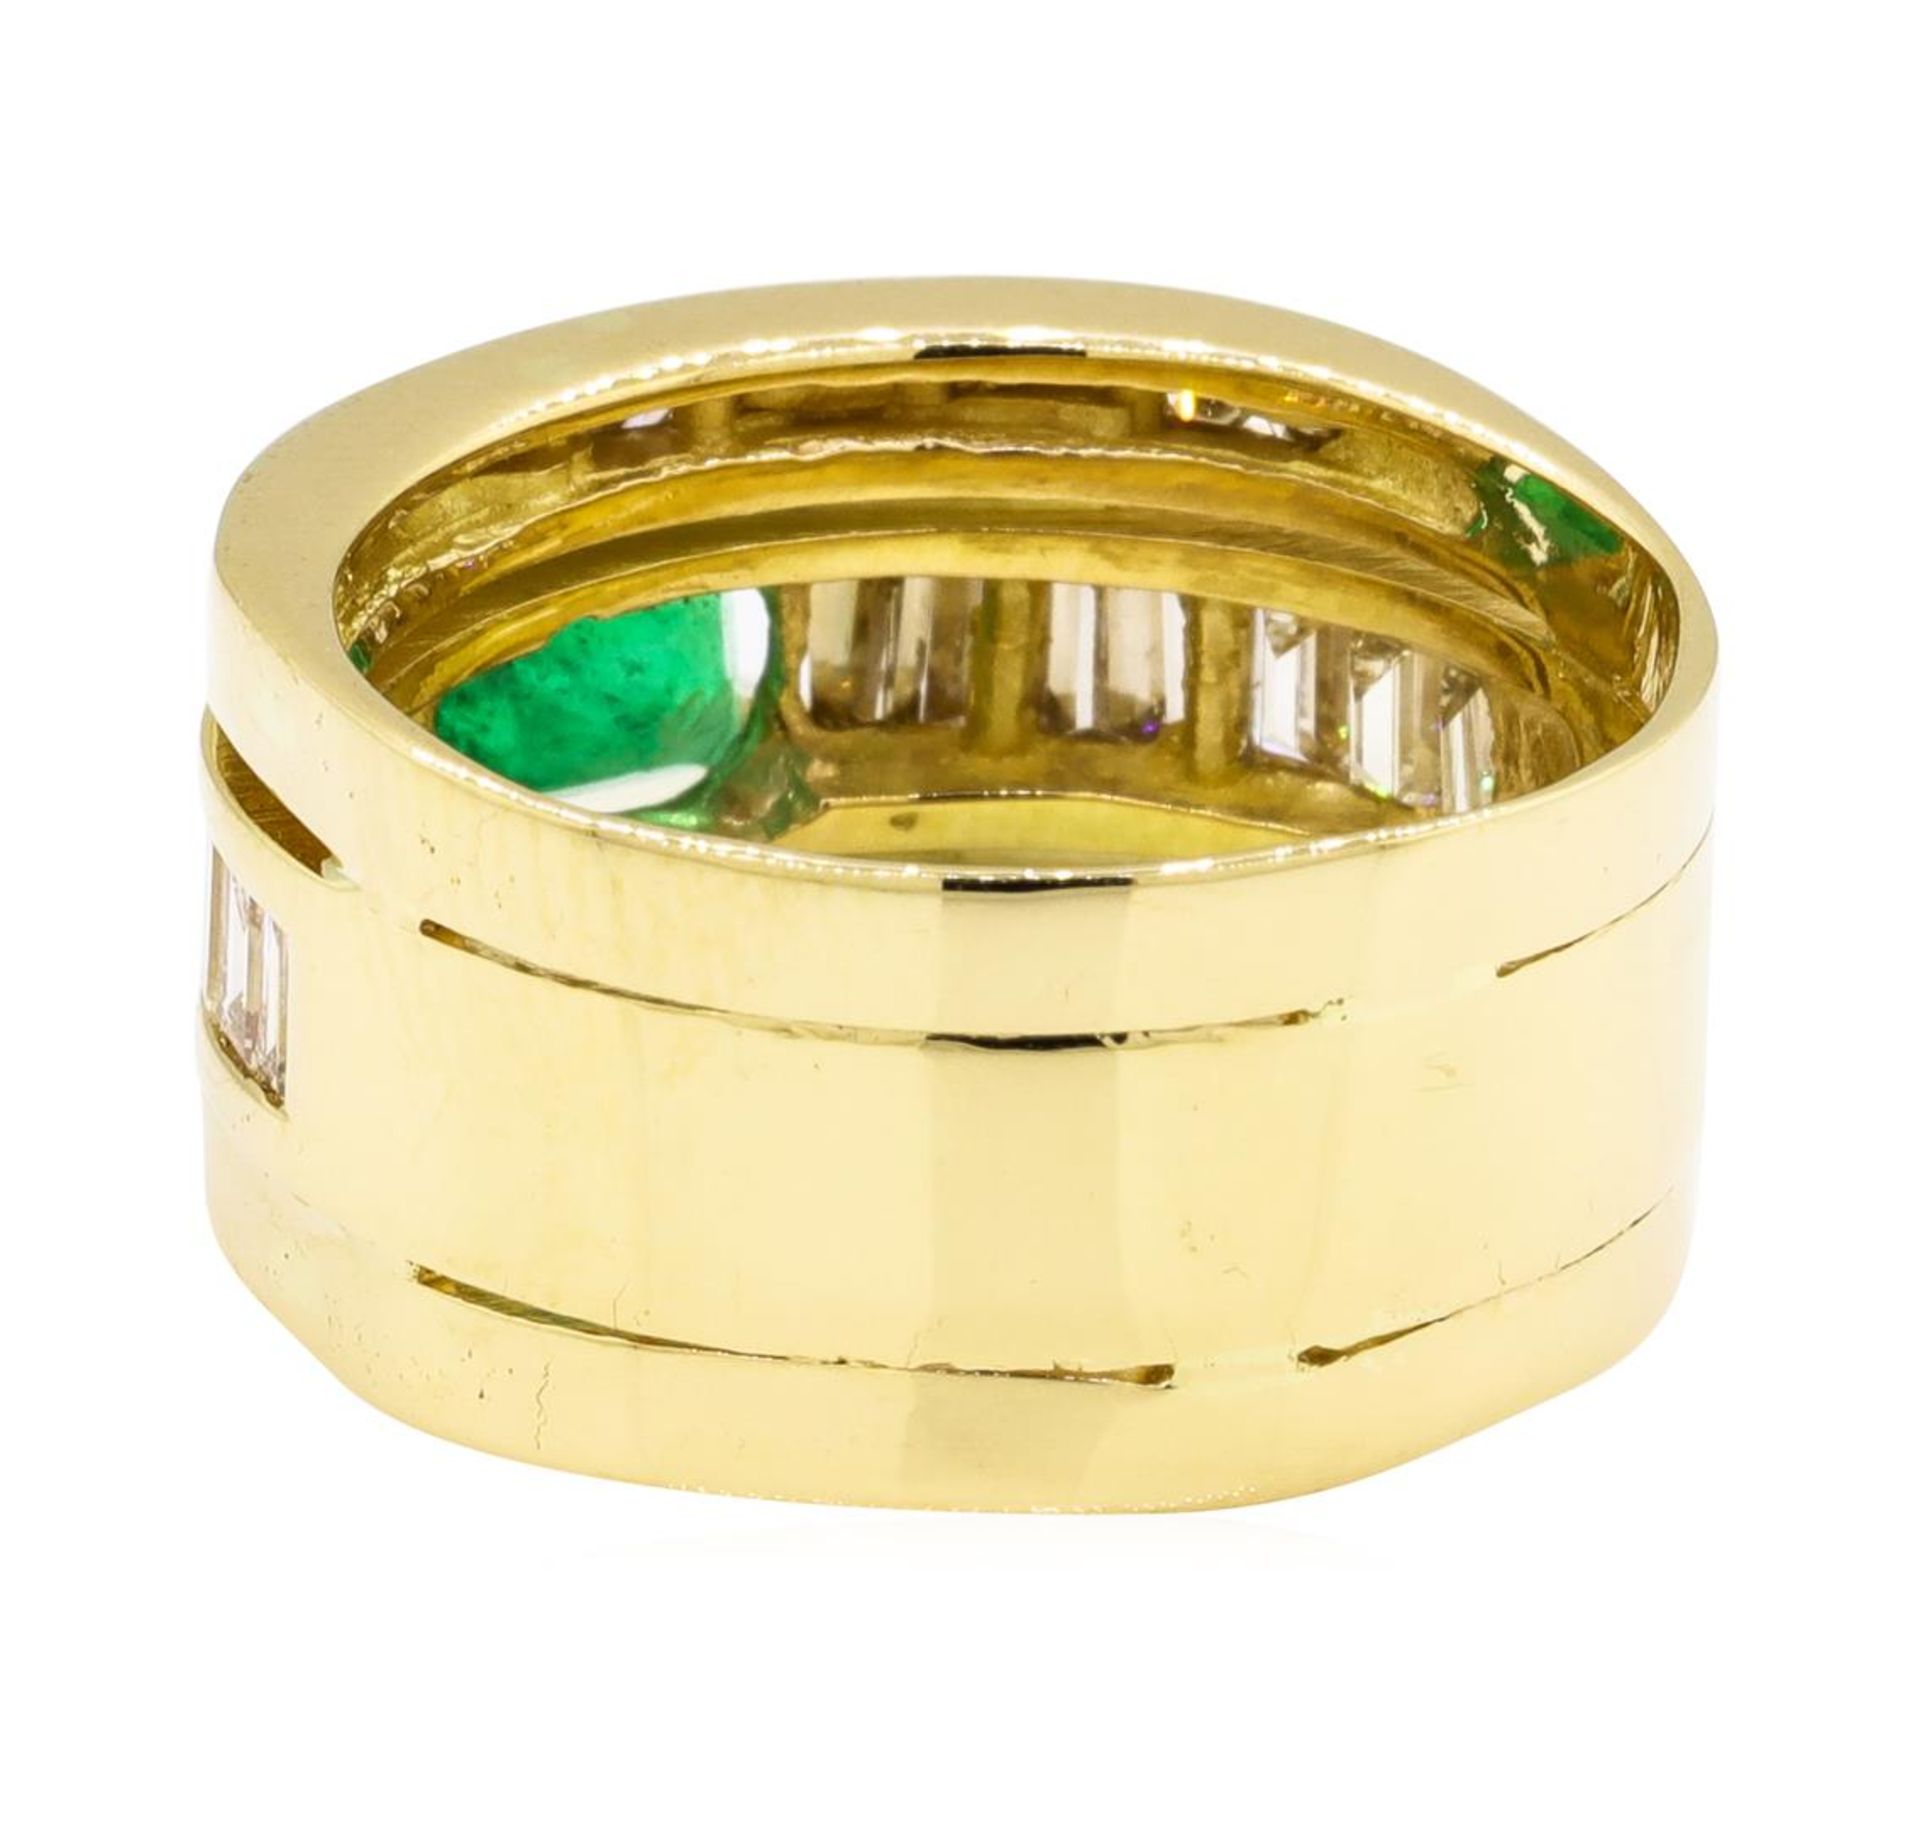 0.90 ctw ct Emerald and Diamond Ring - 18KT Yellow Gold - Image 3 of 5